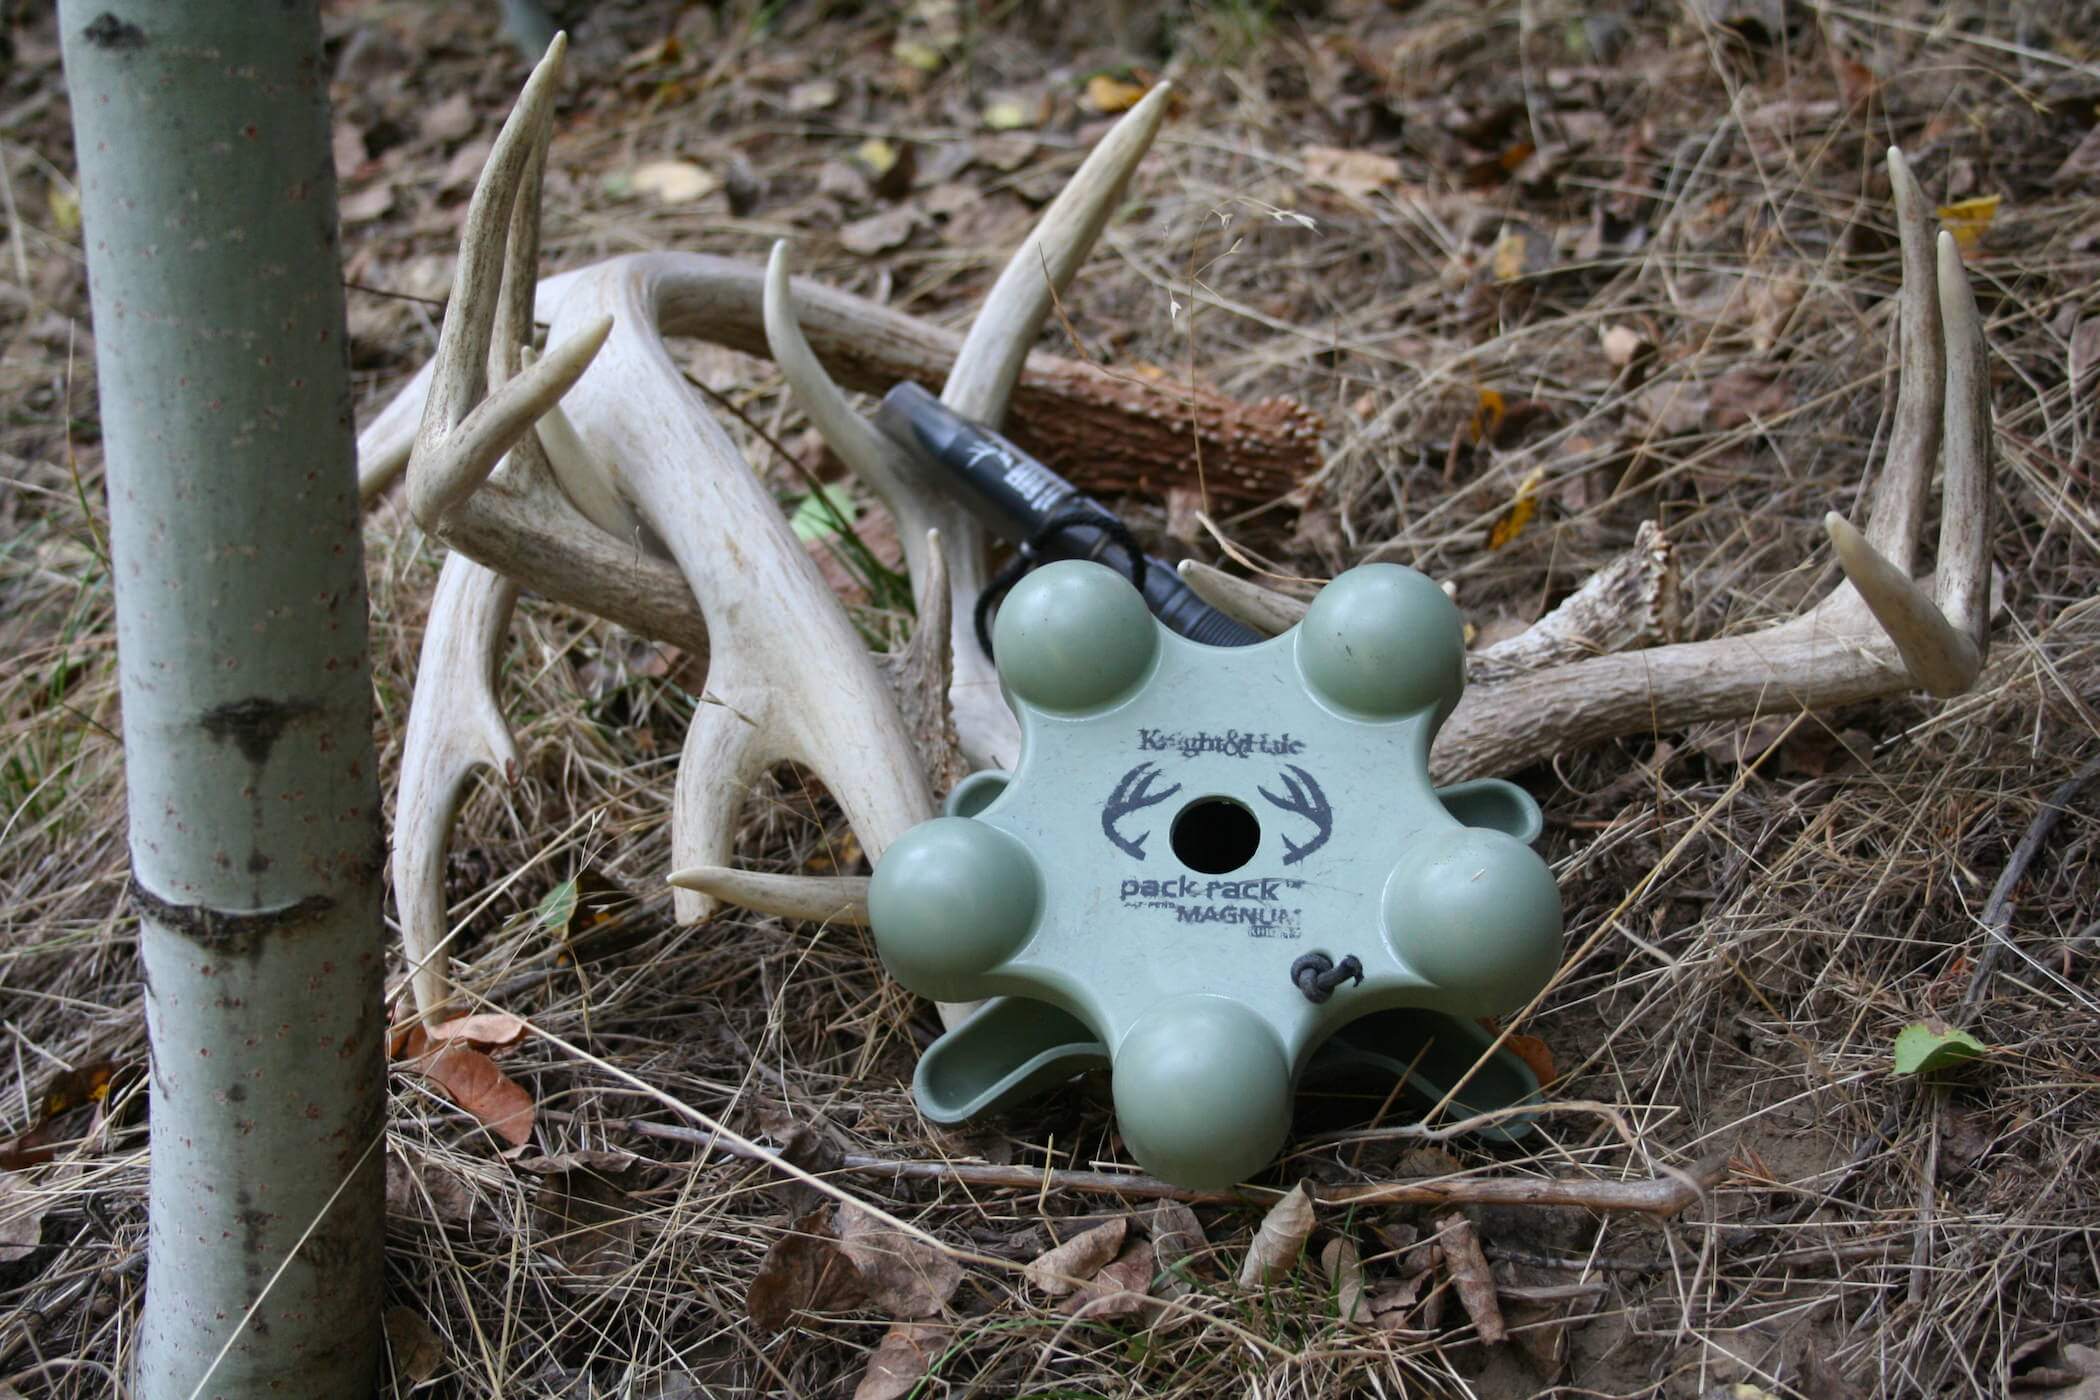 What Deer Call Works Best for Attracting Bucks?